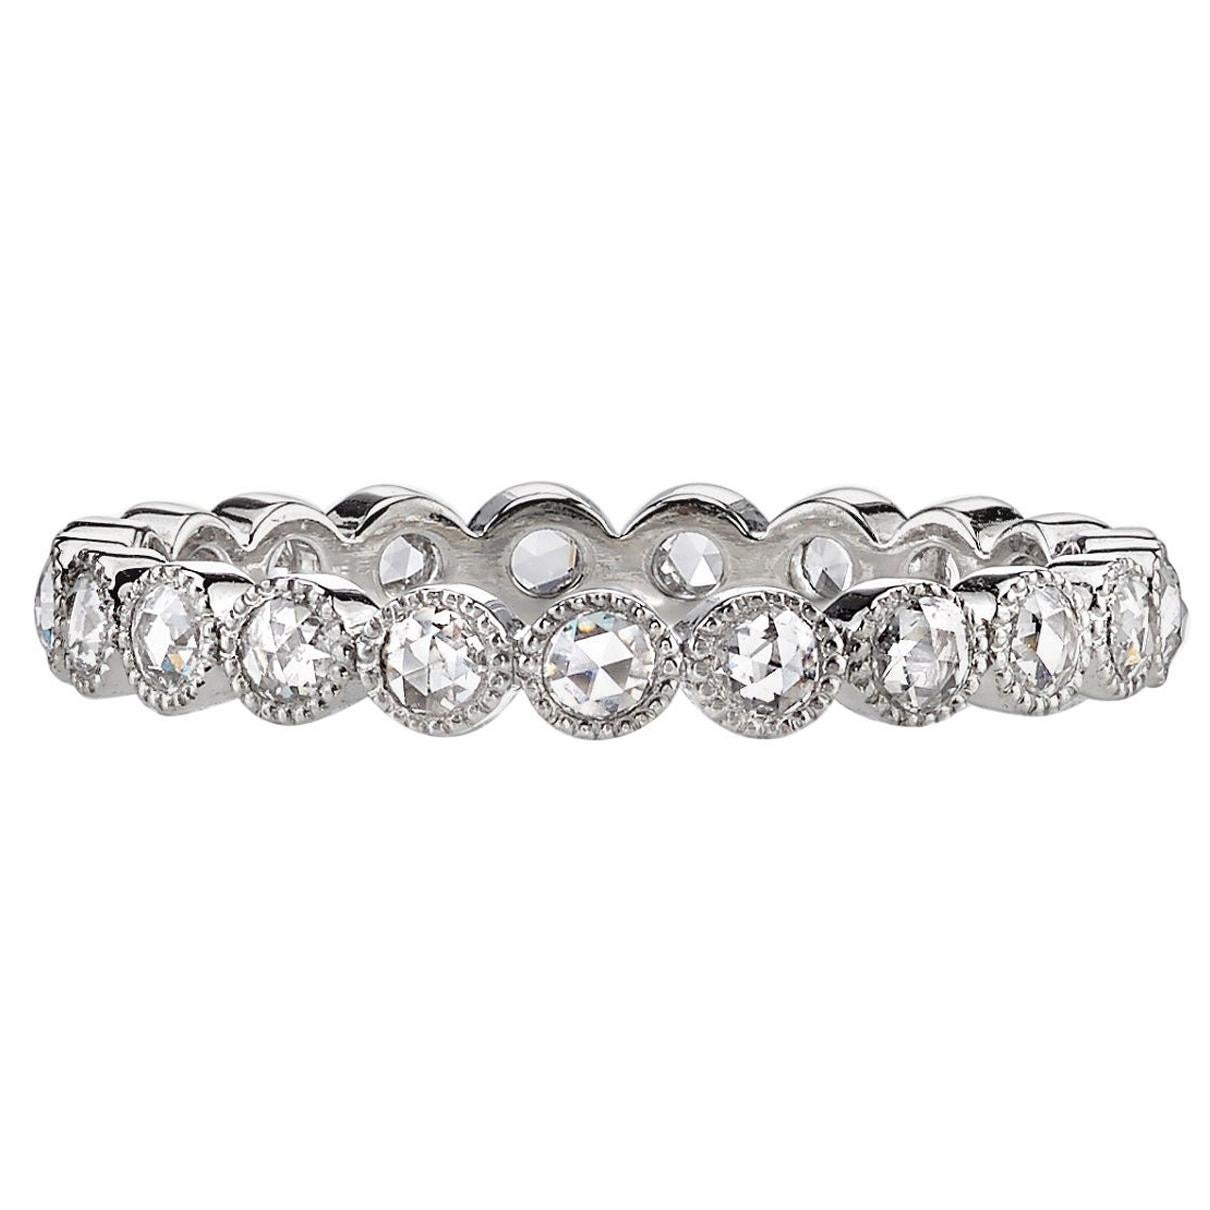 For Sale:  Handcrafted Gabby Rose Cut Diamond Eternity Band by Single Stone